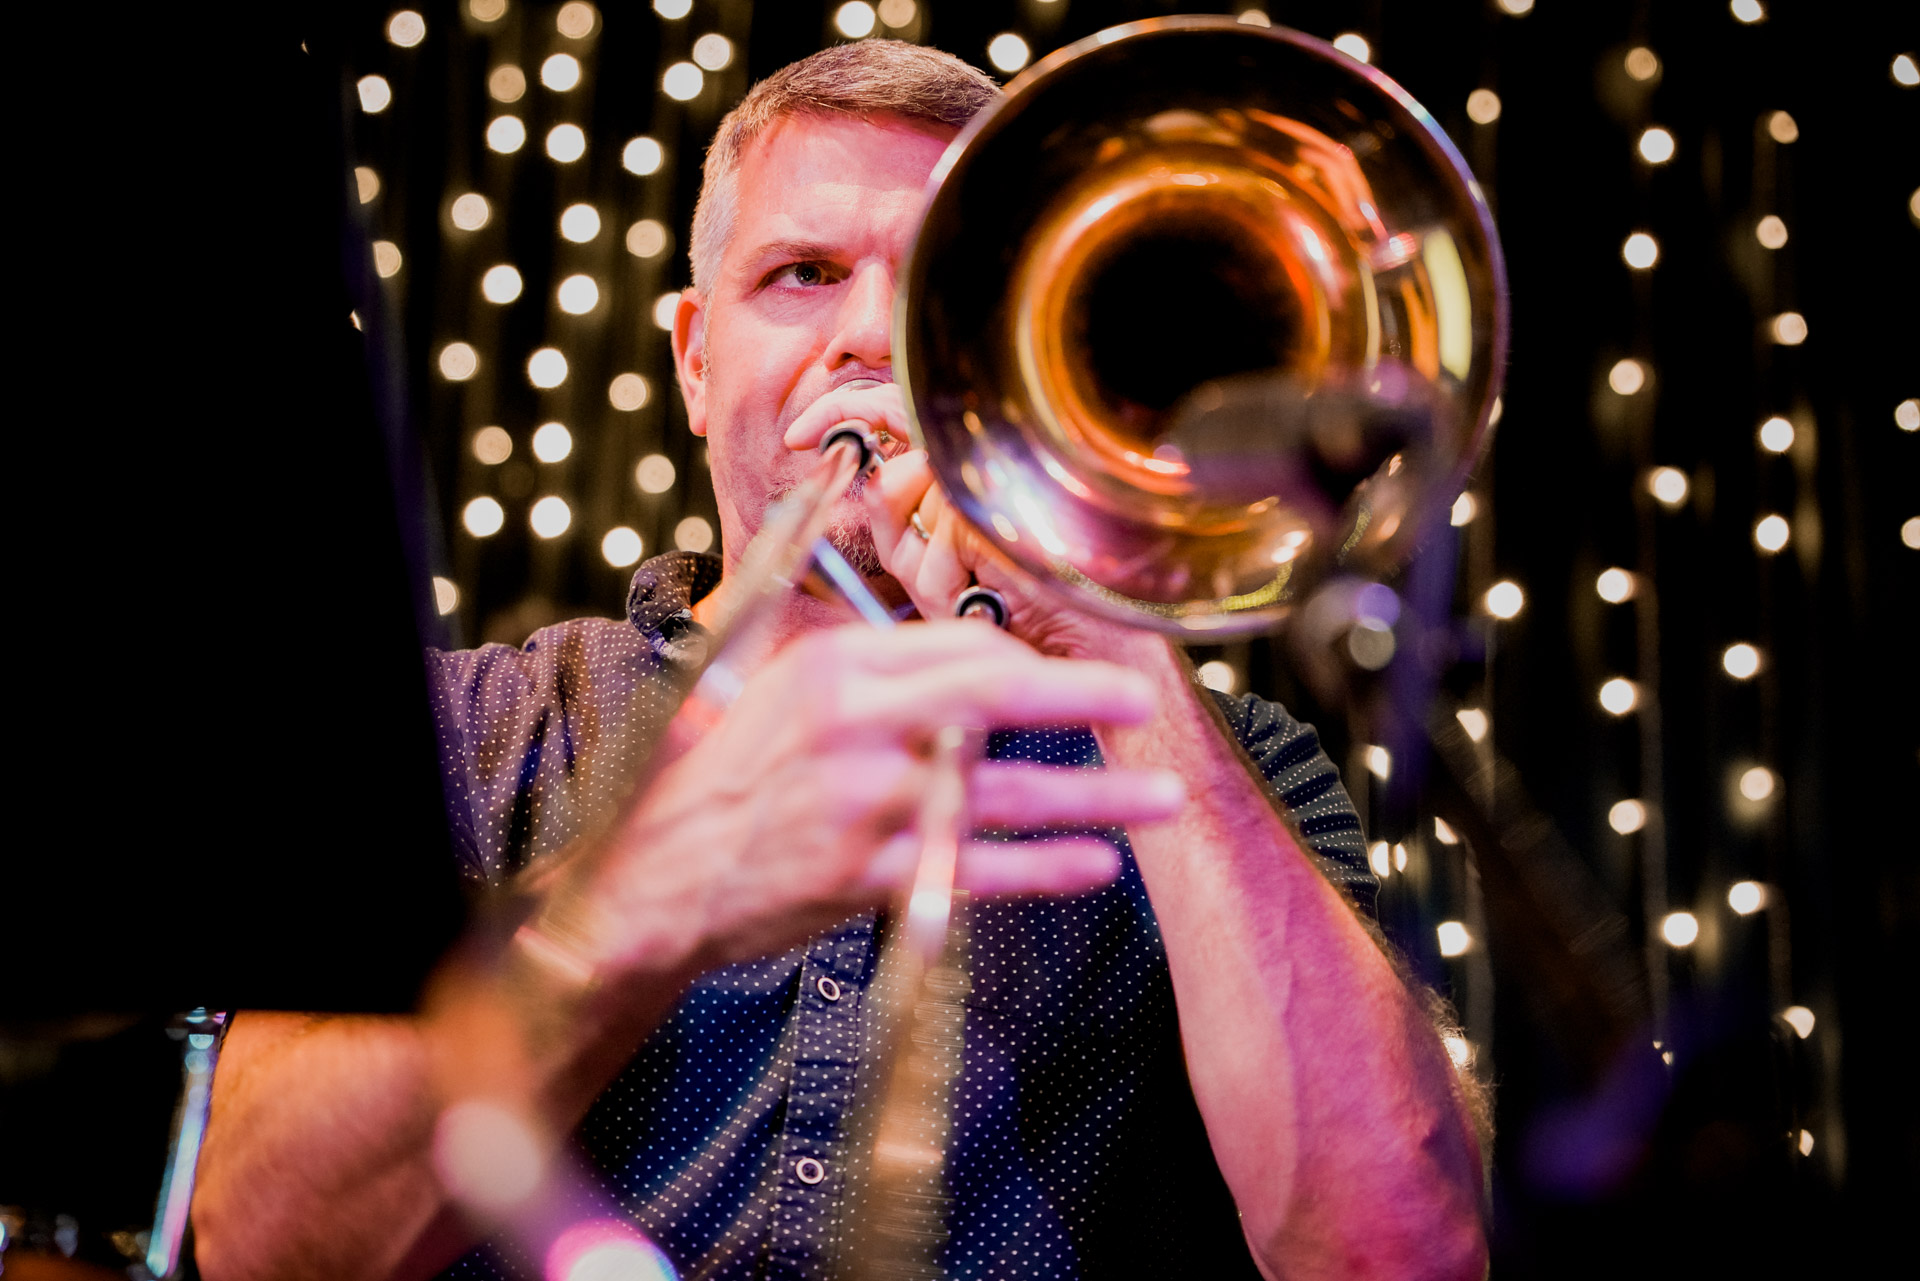 A trombone player on stage